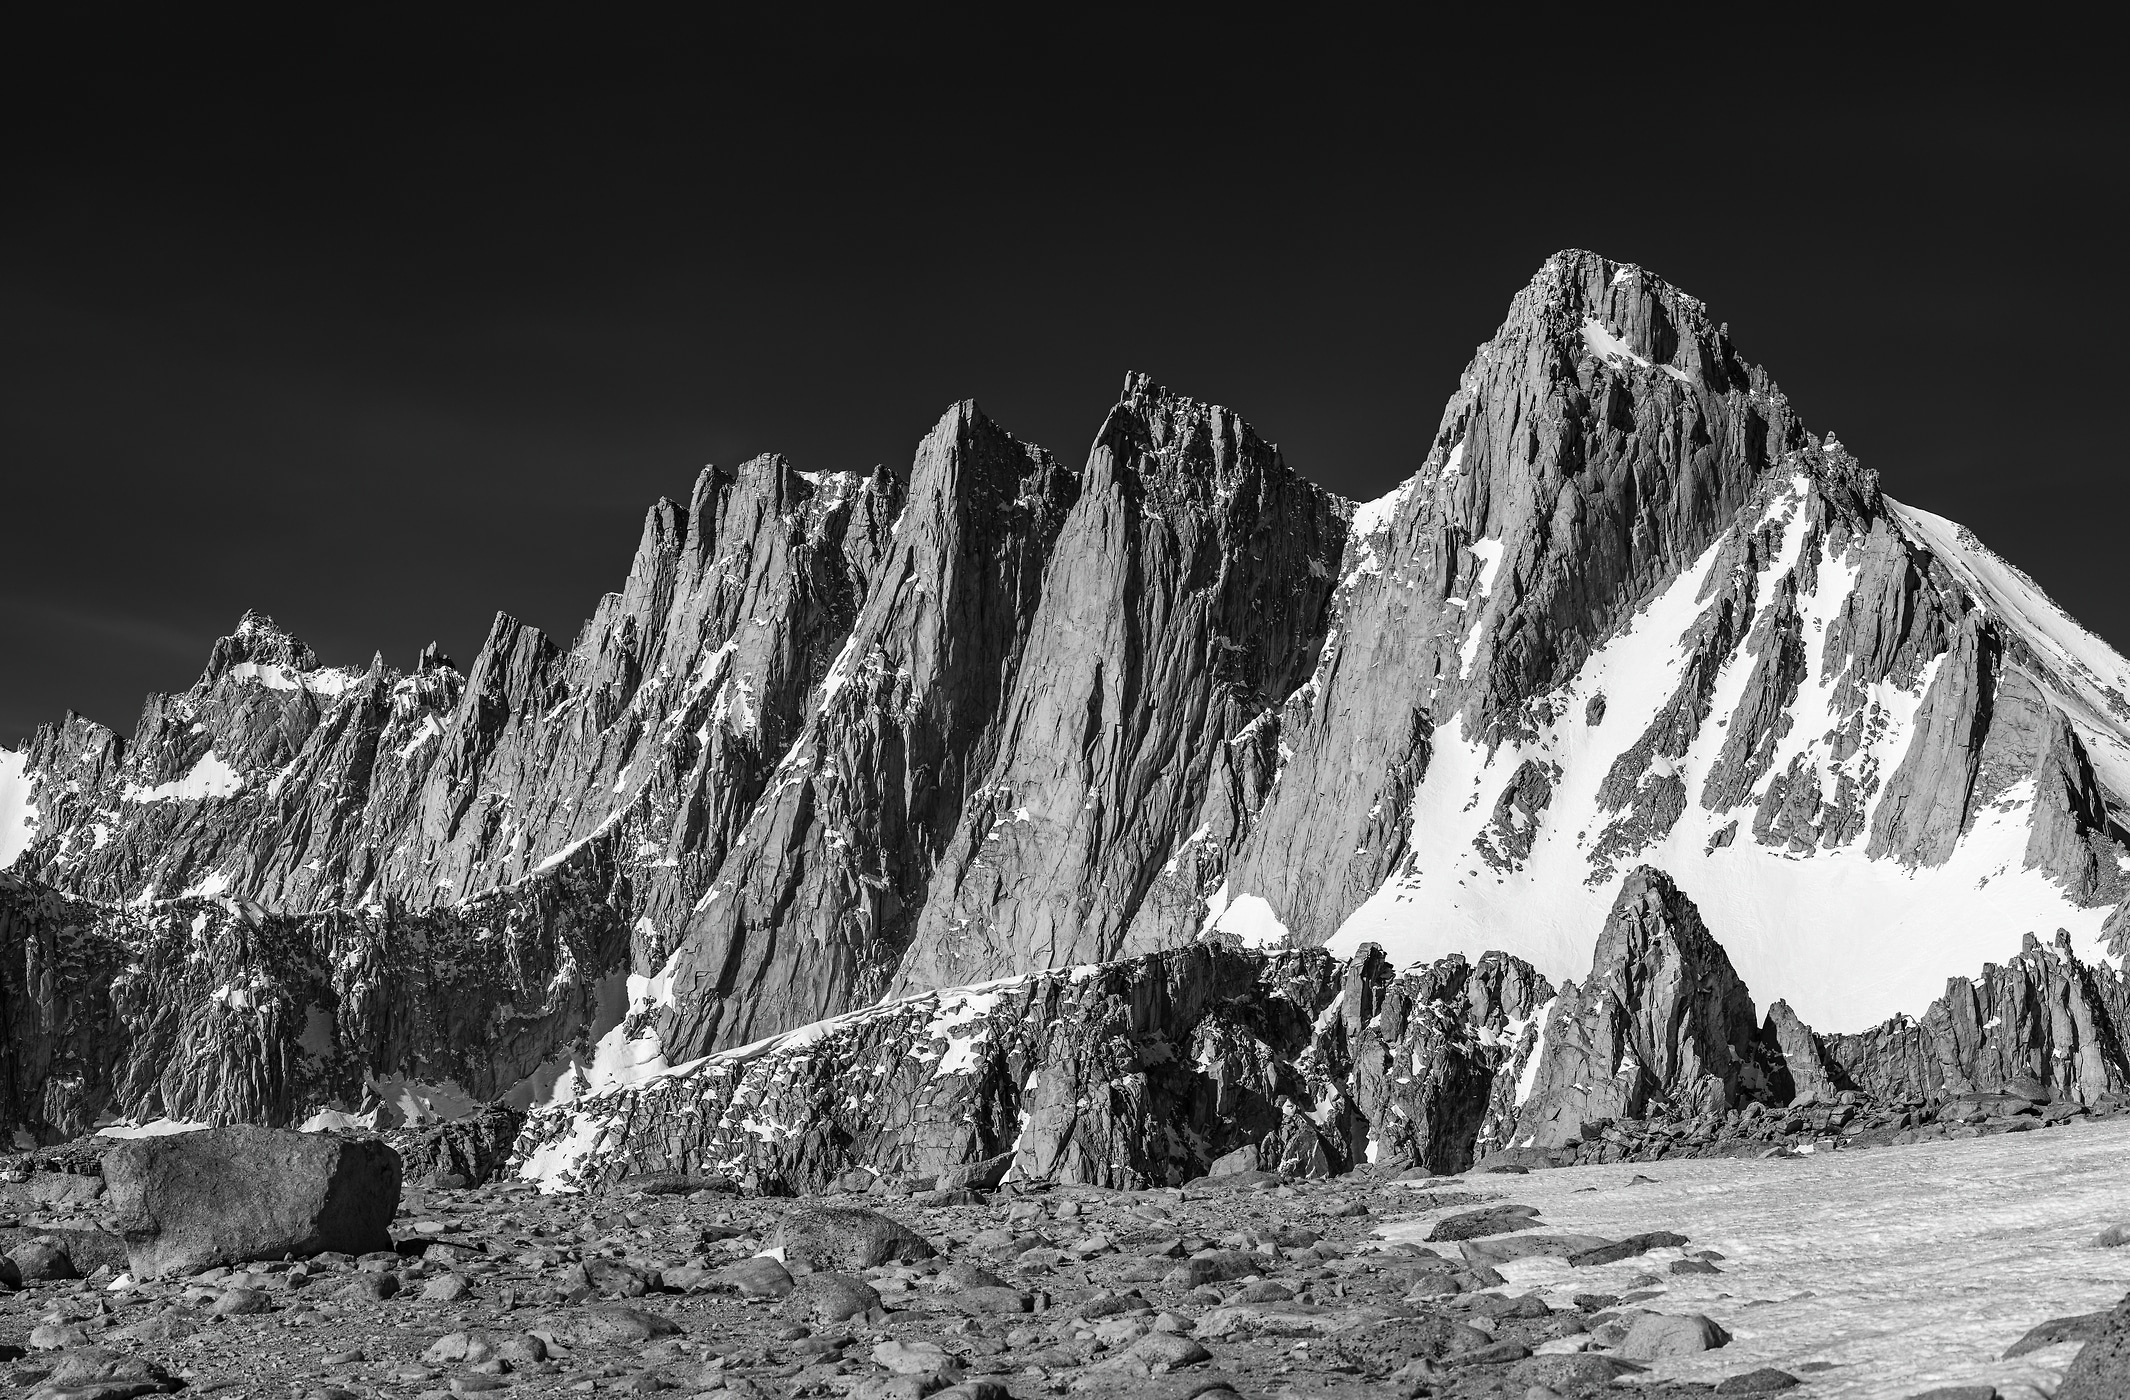 263 megapixels! A very high resolution, large-format VAST photo print of Mount Whitney in black and white; fine art landscape photograph created by Scott Rinckenberger of Mount Whitney in the Sierra Nevada Mountains, California.